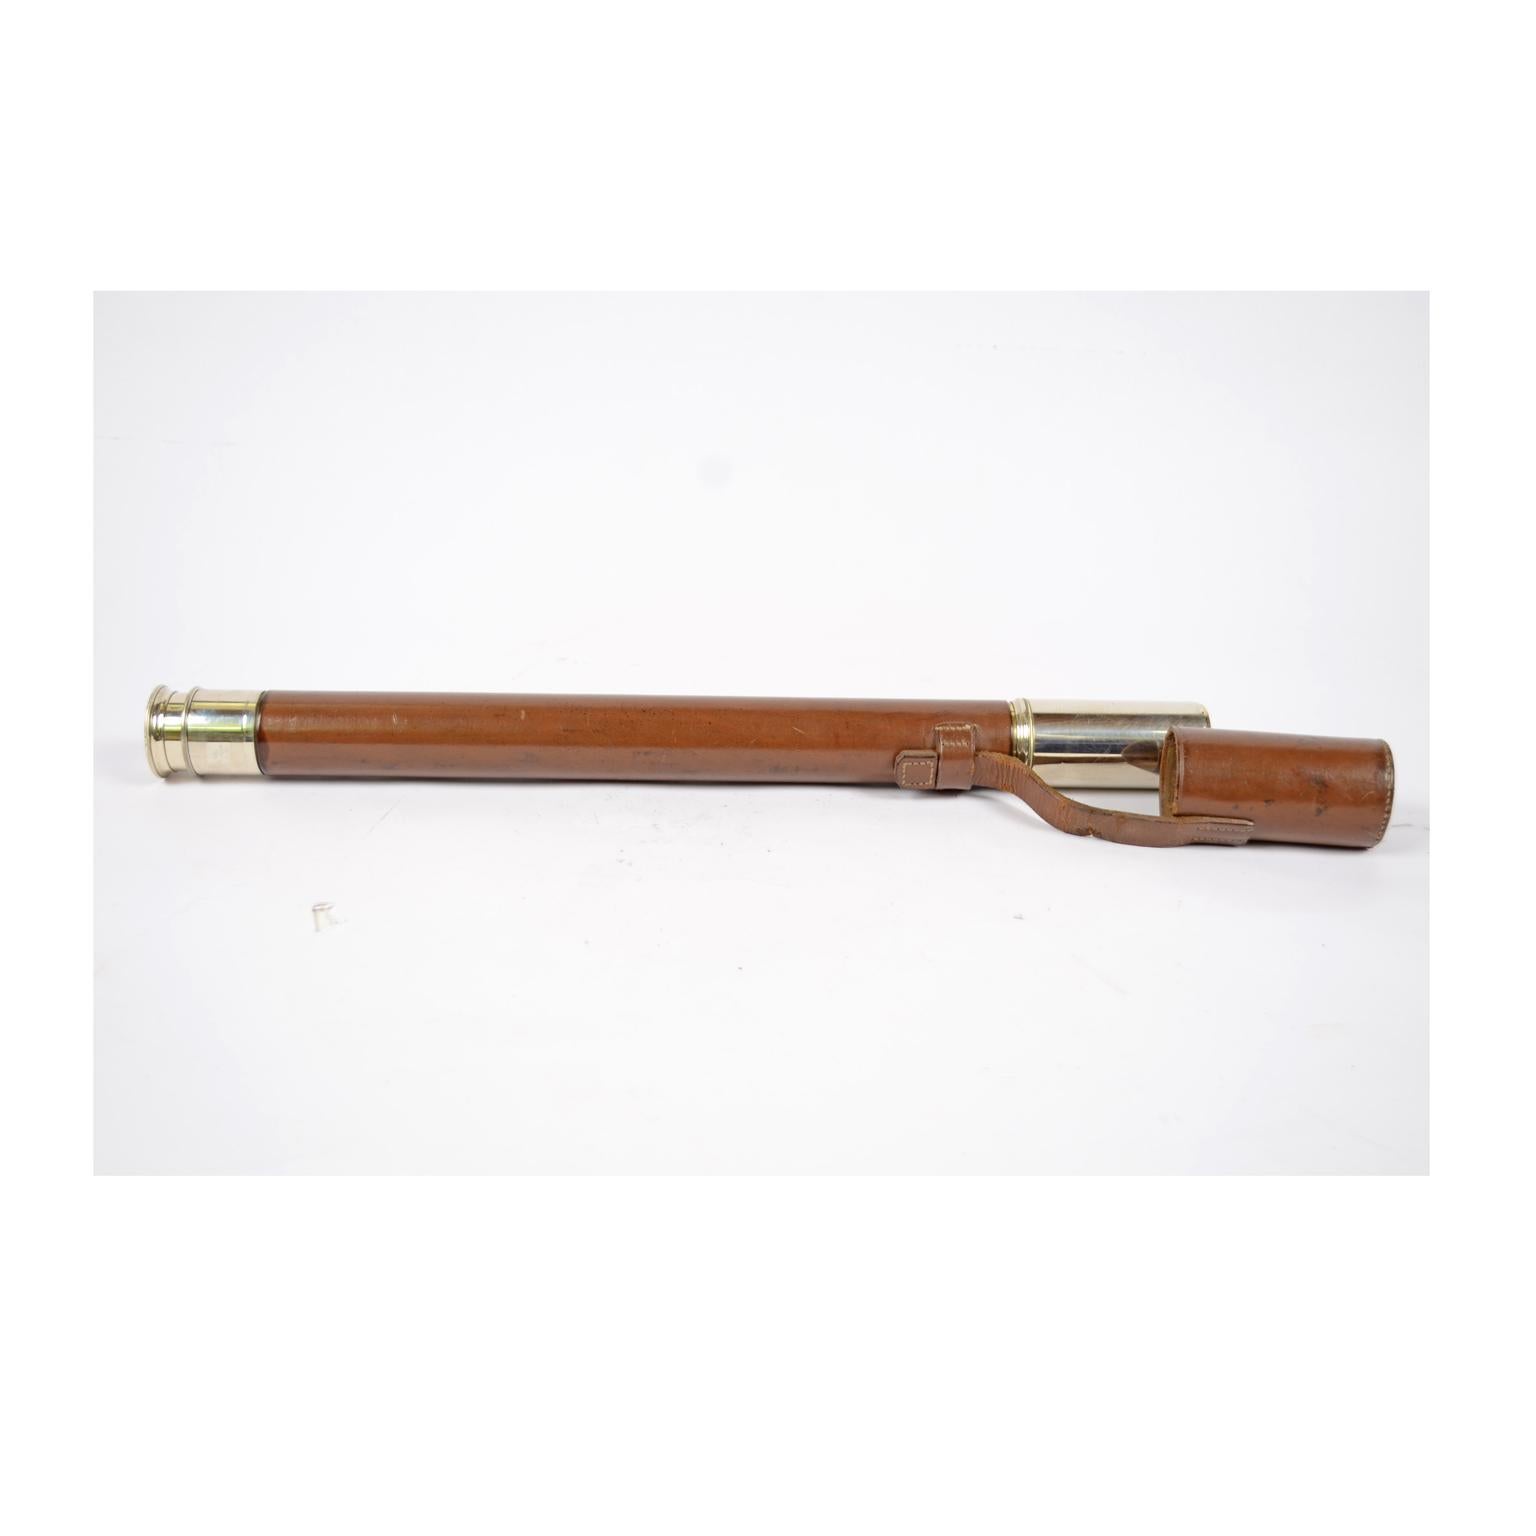 Mid-20th Century Brass Telescope Covered with Leather, UK, 1940s